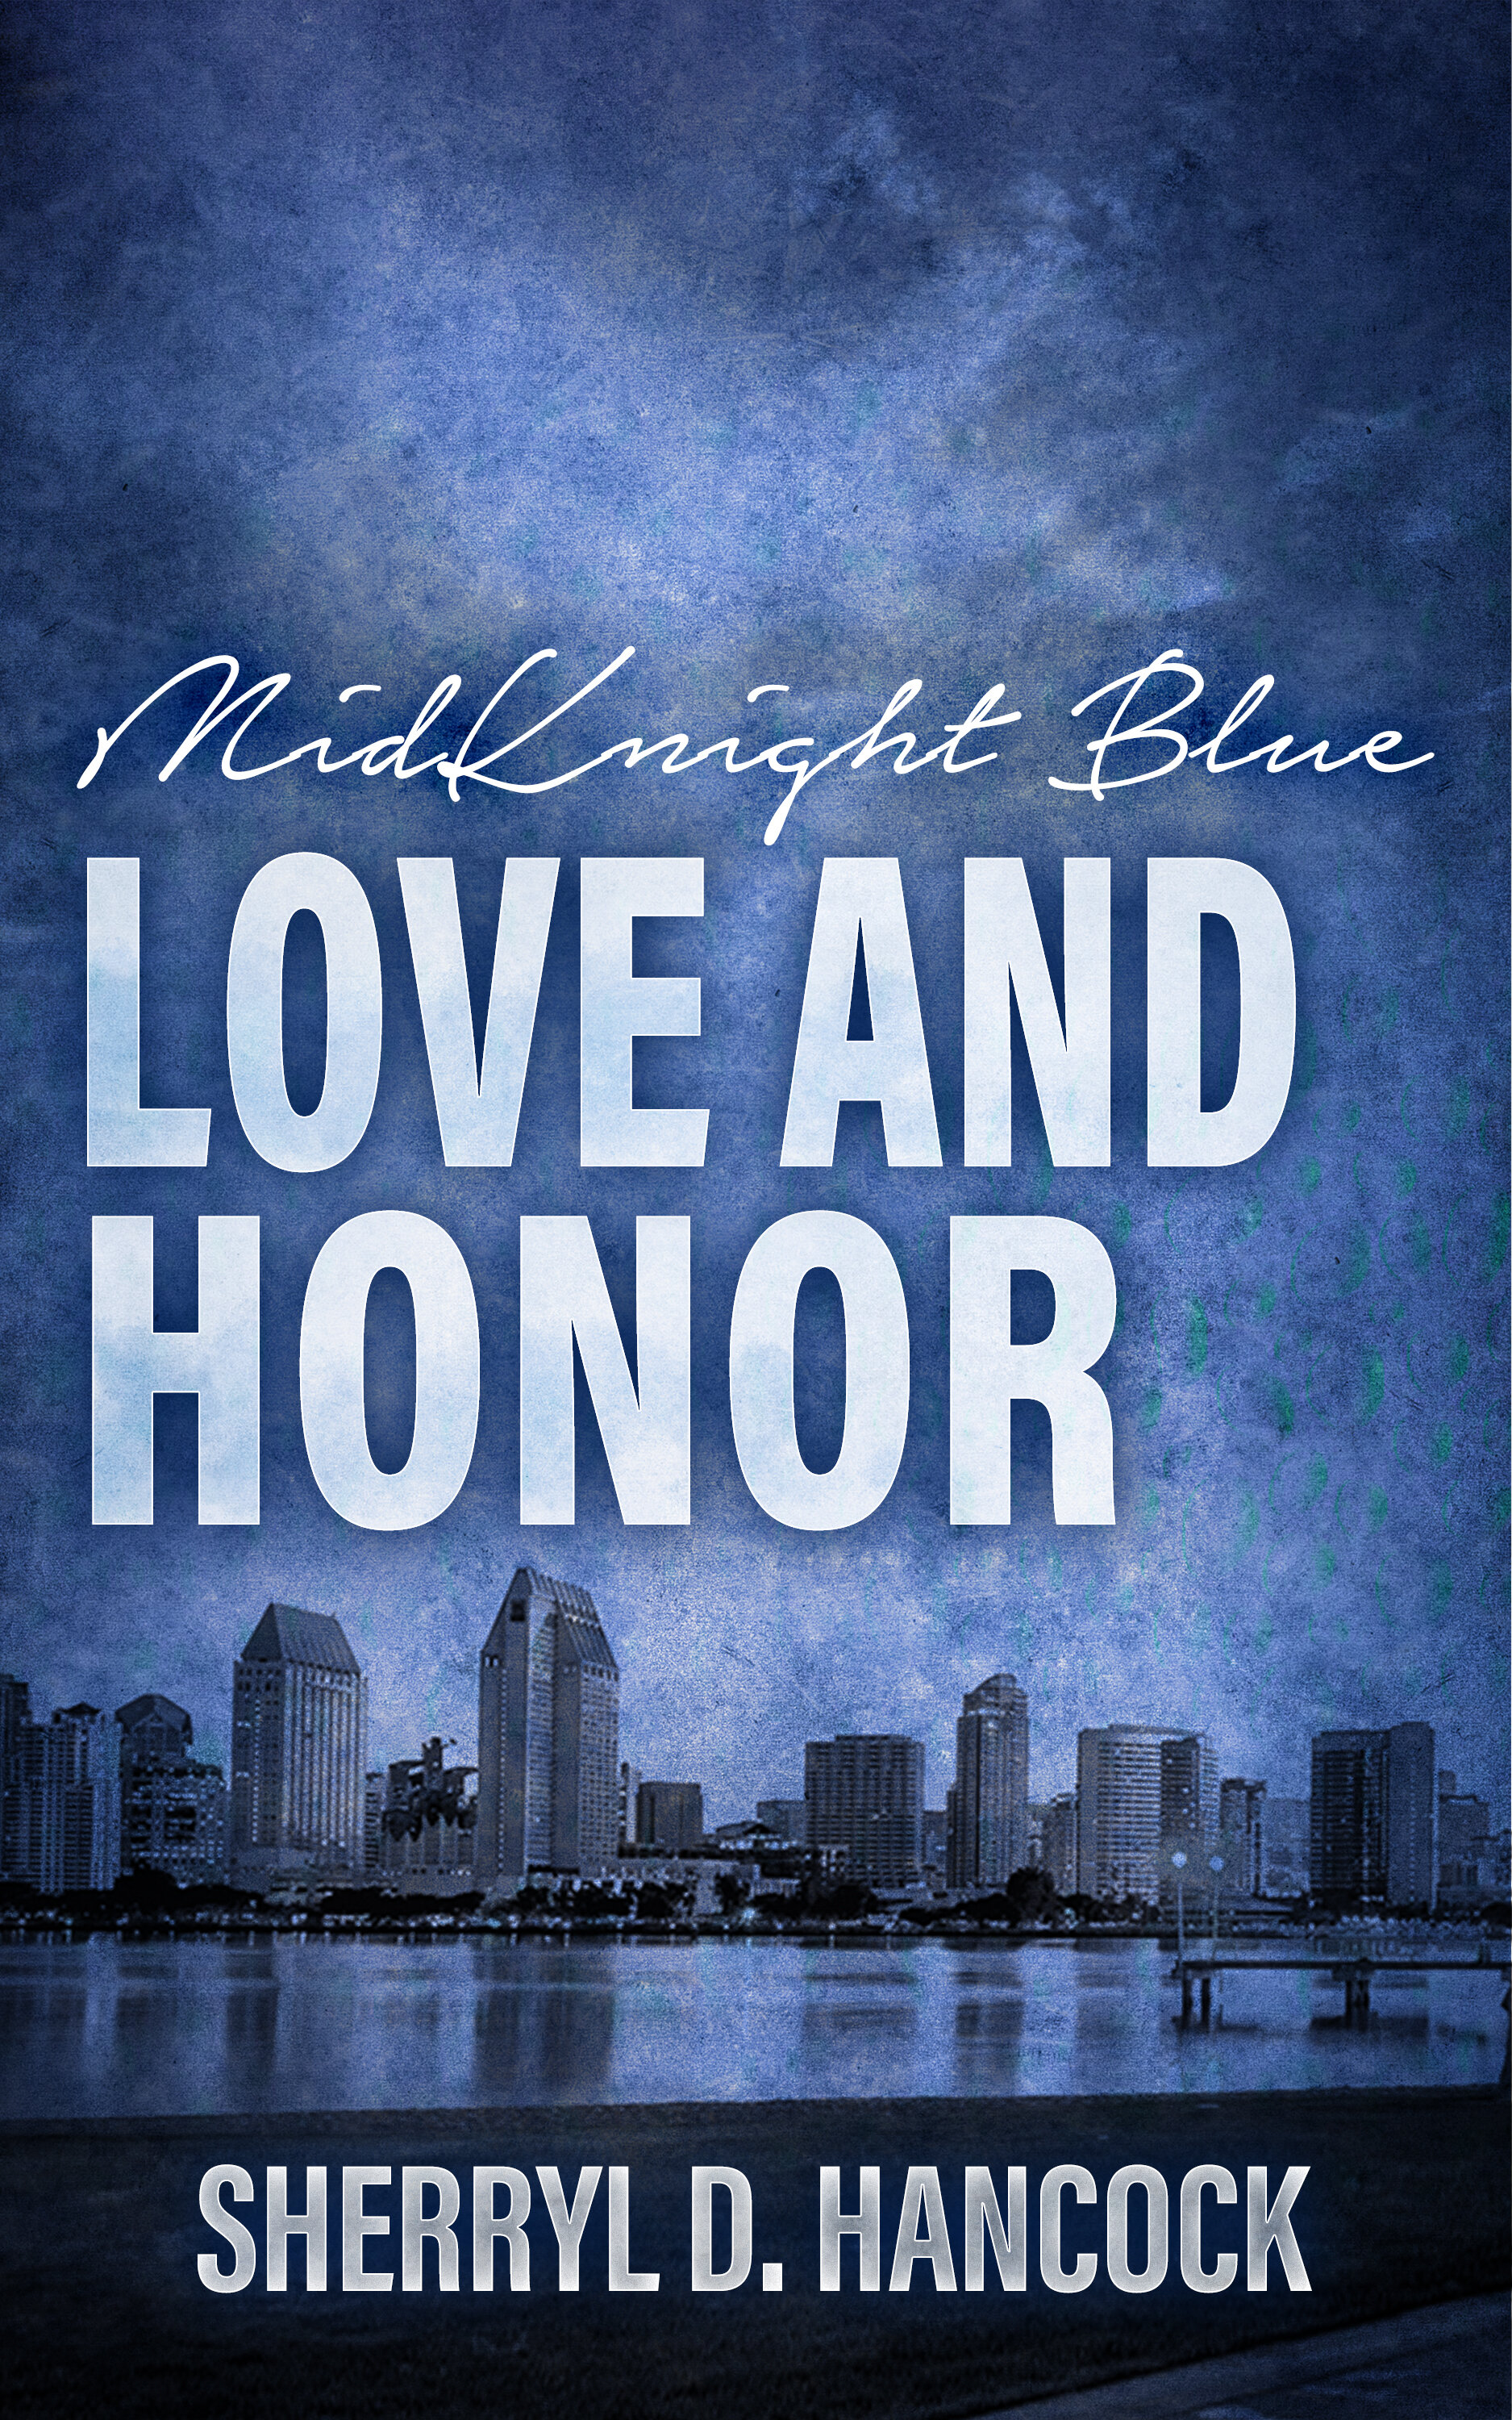 MidKnight Blue - 17 - Love and Honor - EBook copy.jpg